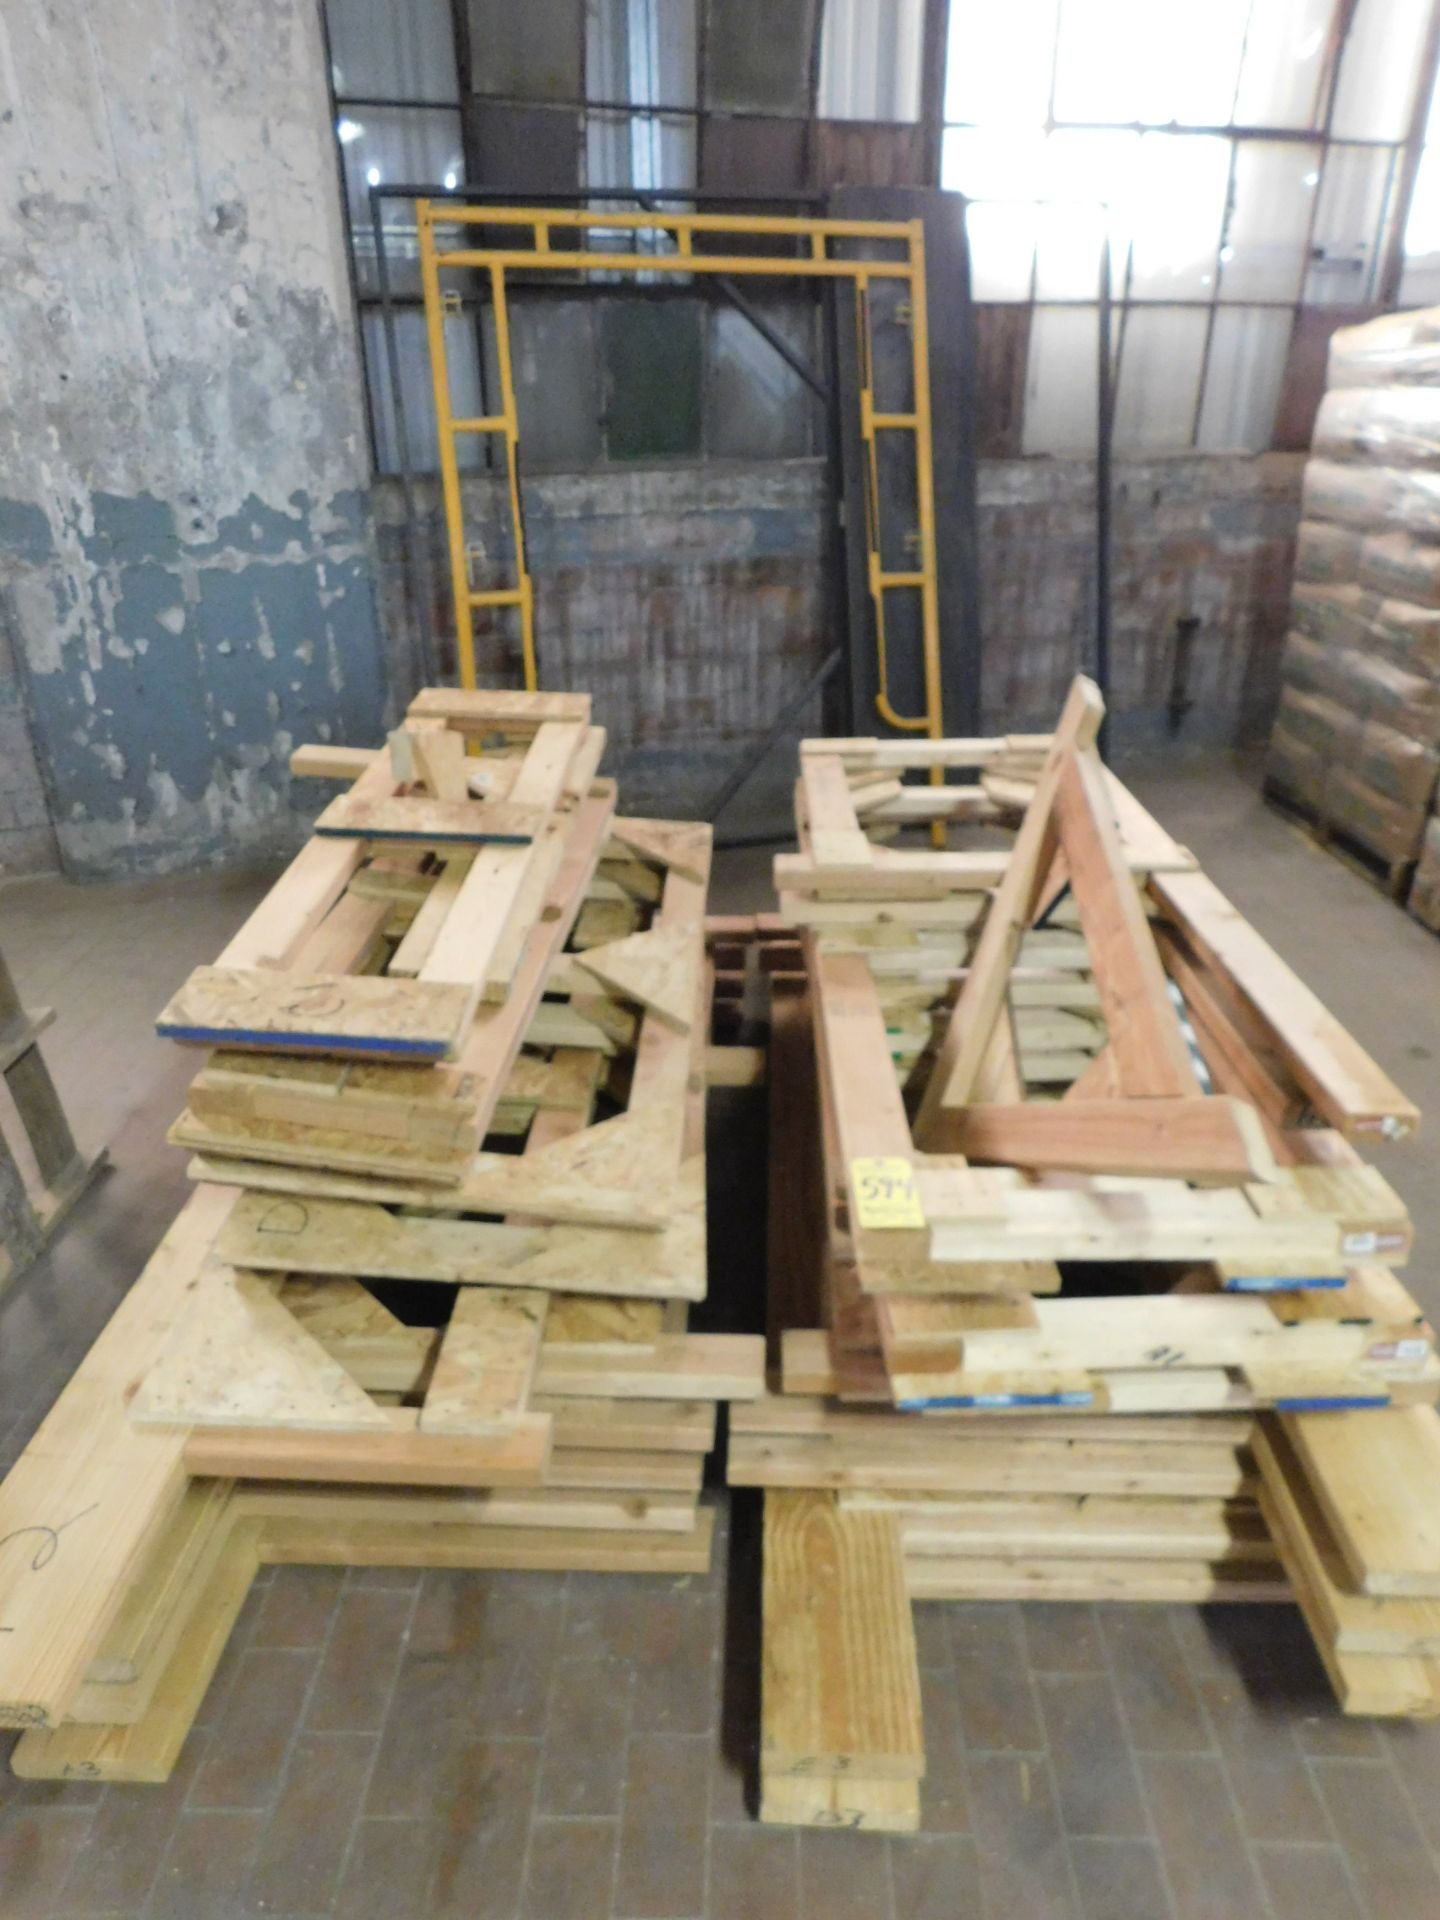 Miscellaneous Wood Crate Material